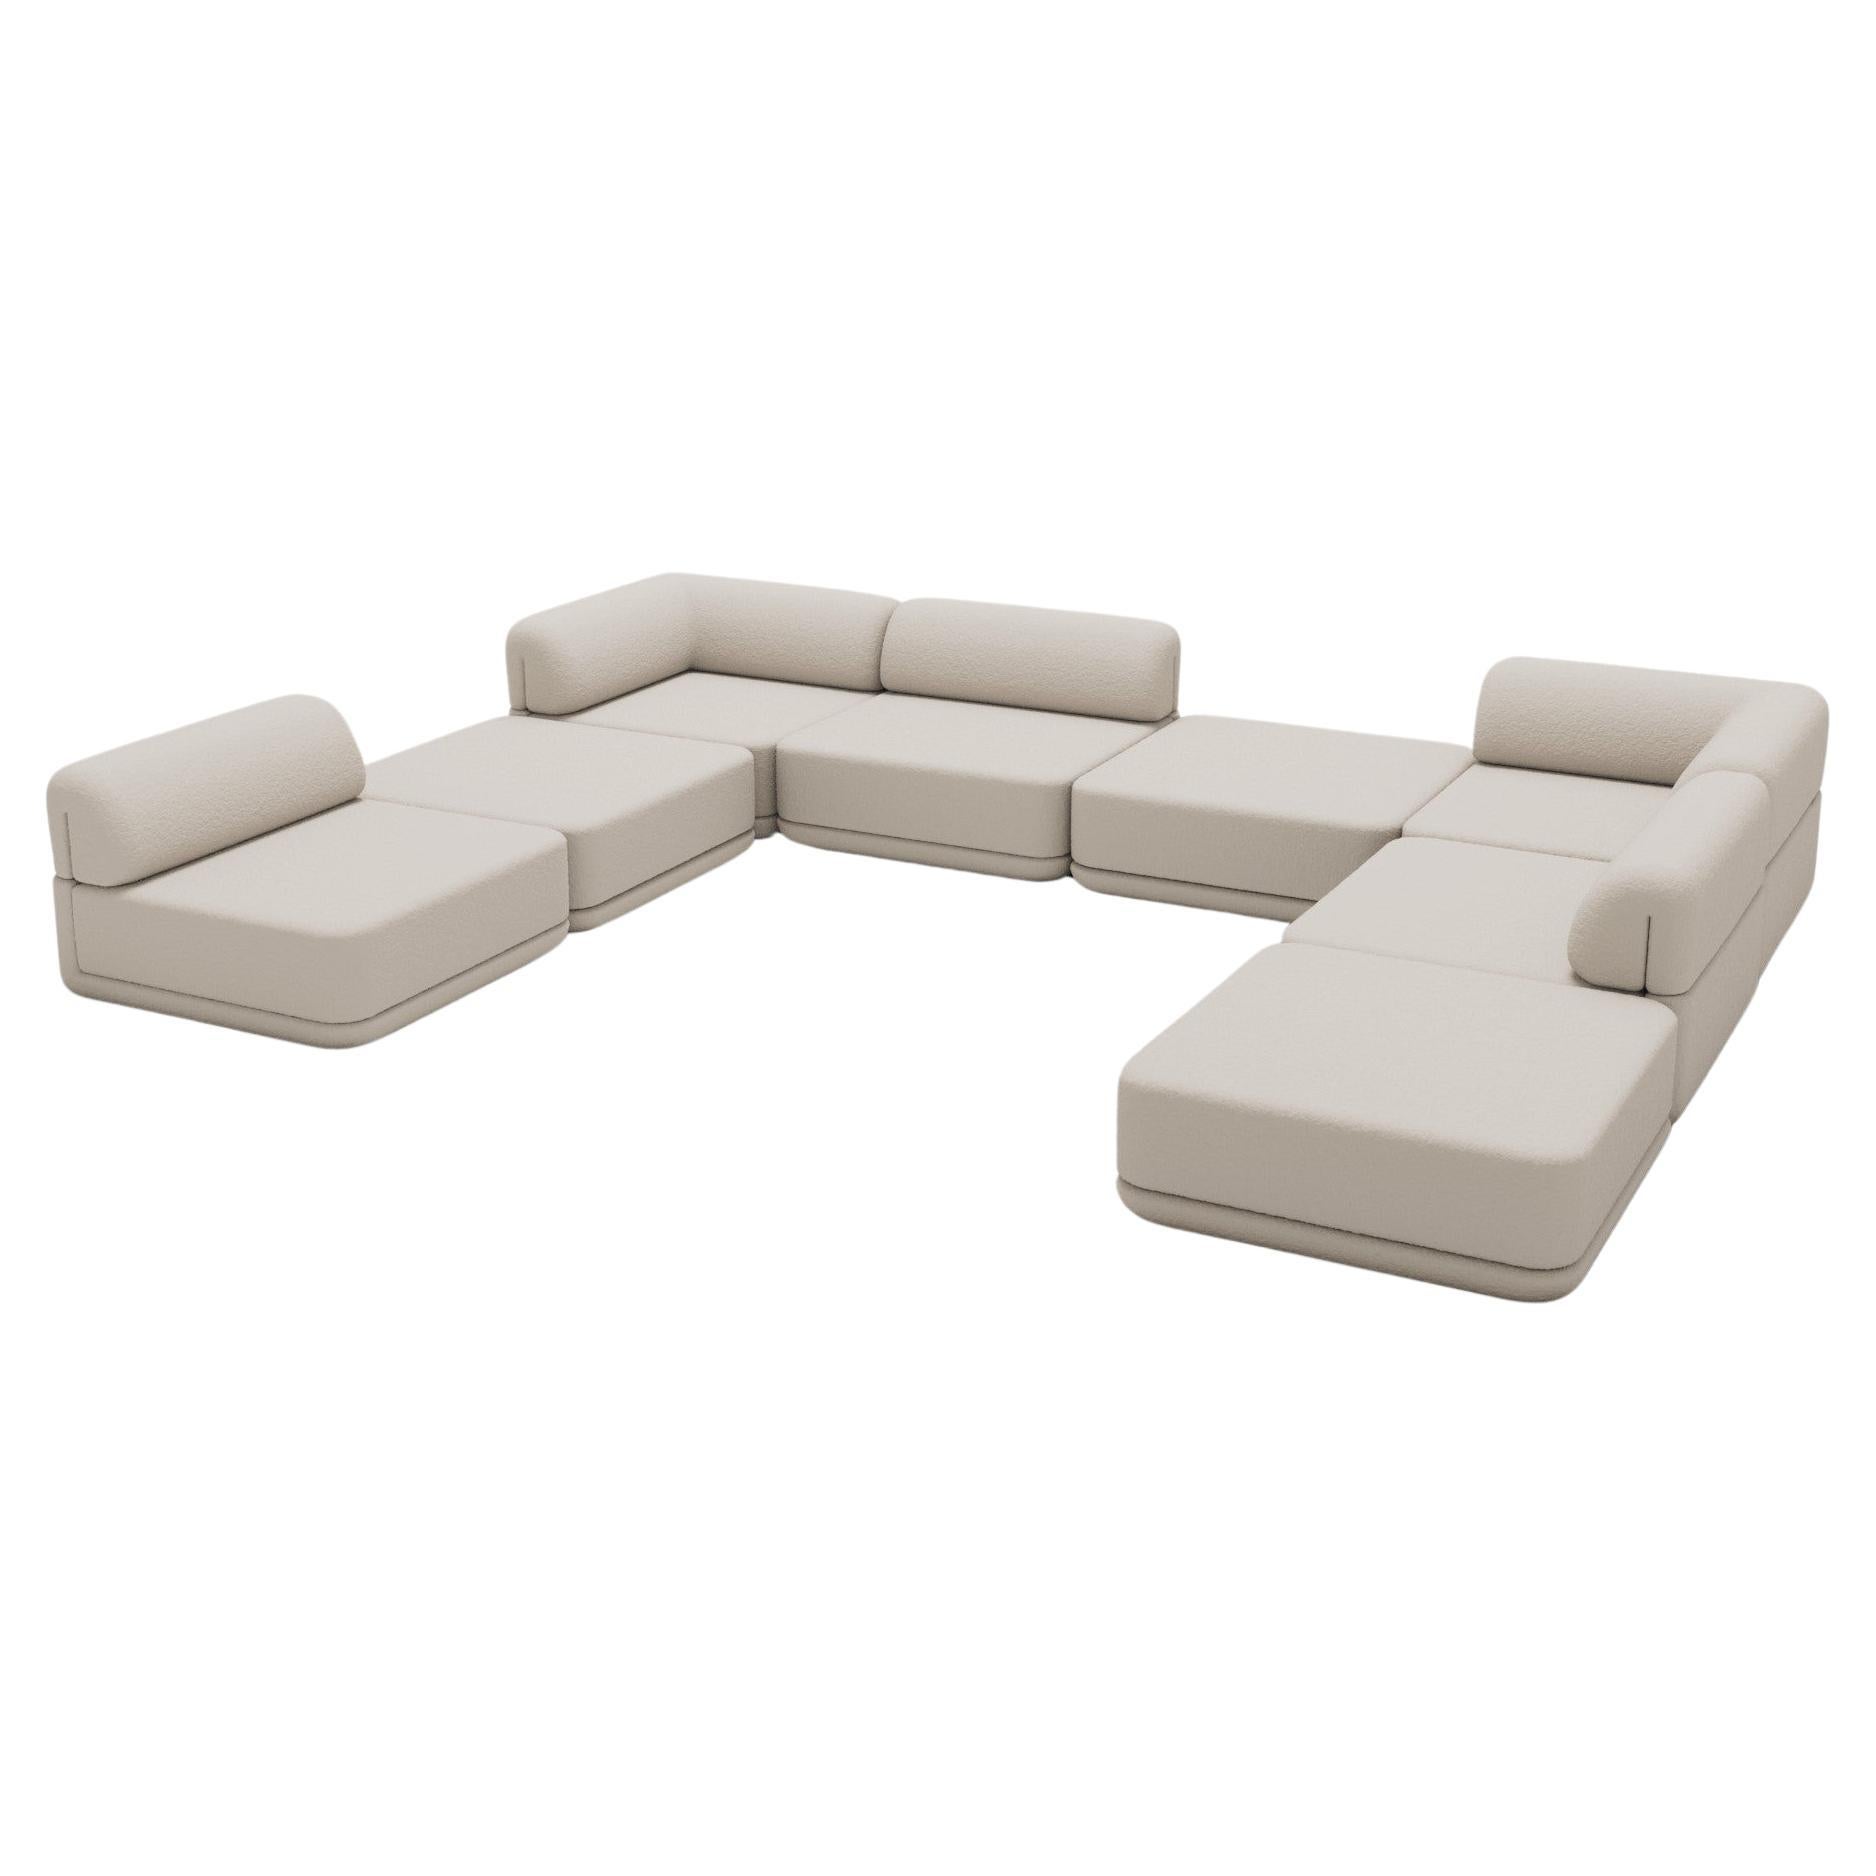 The Cube Sofa - Corner Full Mix Sectional For Sale